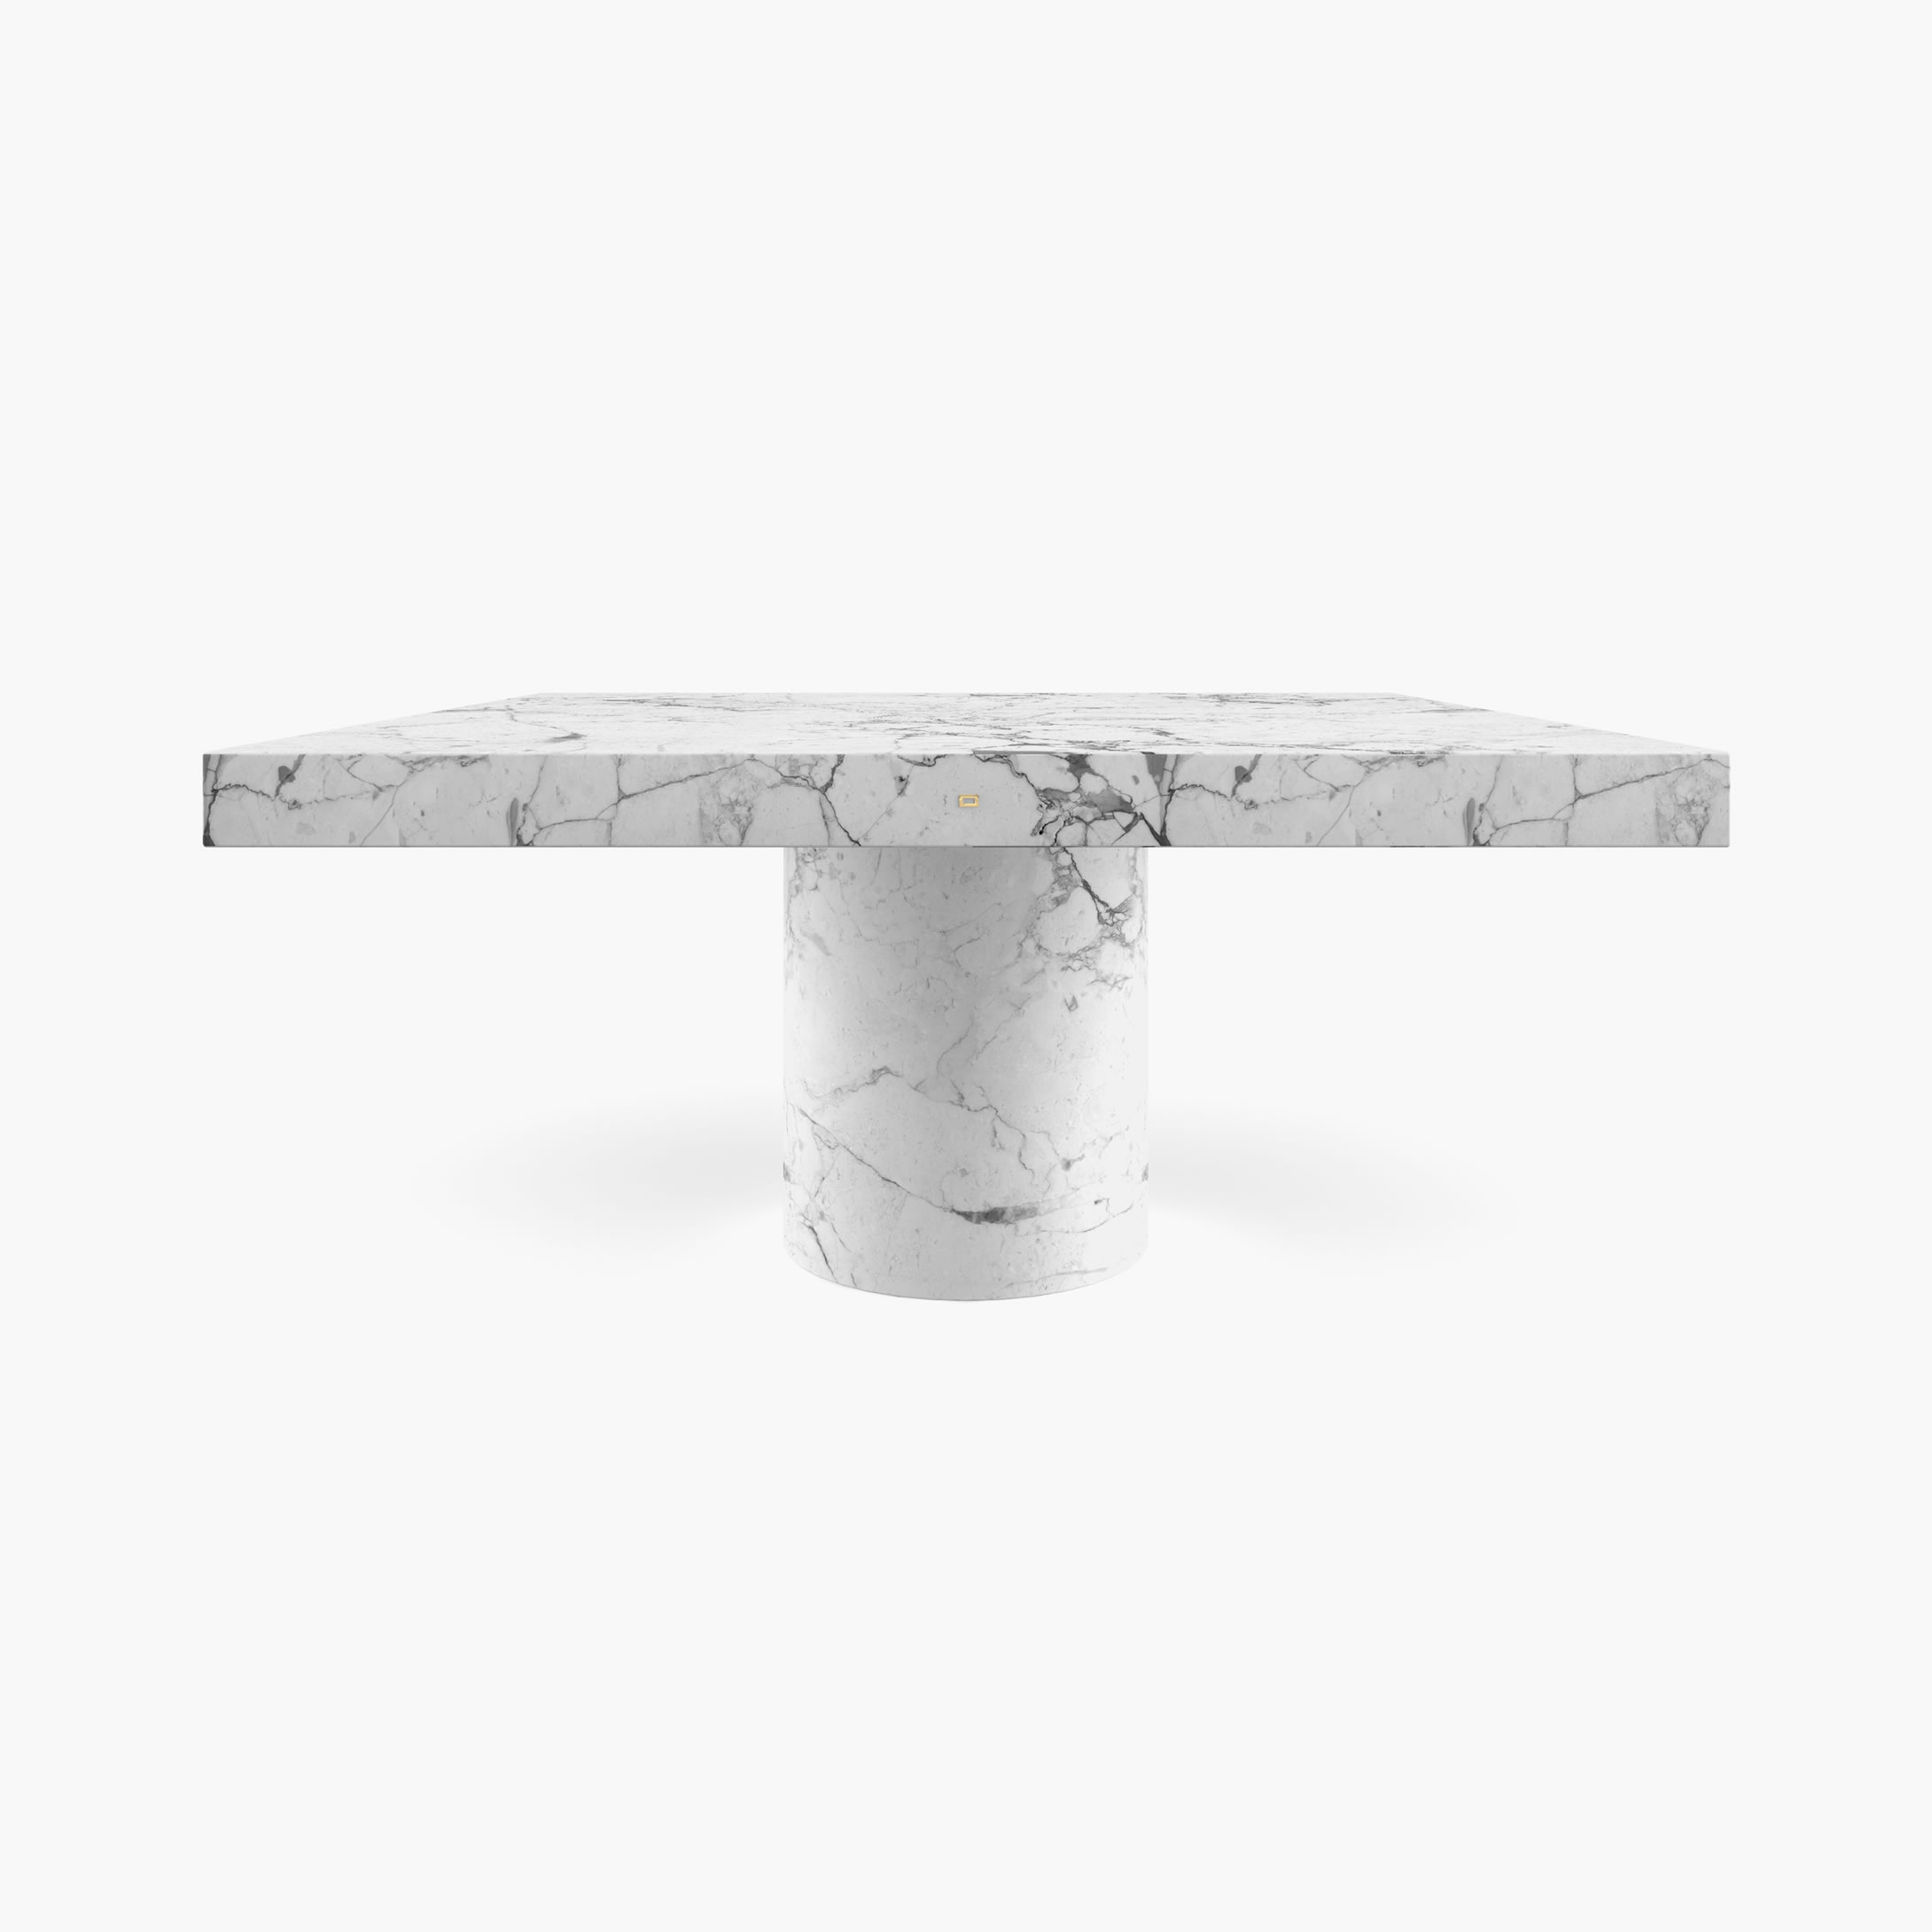 Dining Table cylindrically perforated cuboid leg White Arabescato Marble amazing Dining Room designer Dining Tables FS 194 G FELIX SCHWAKE